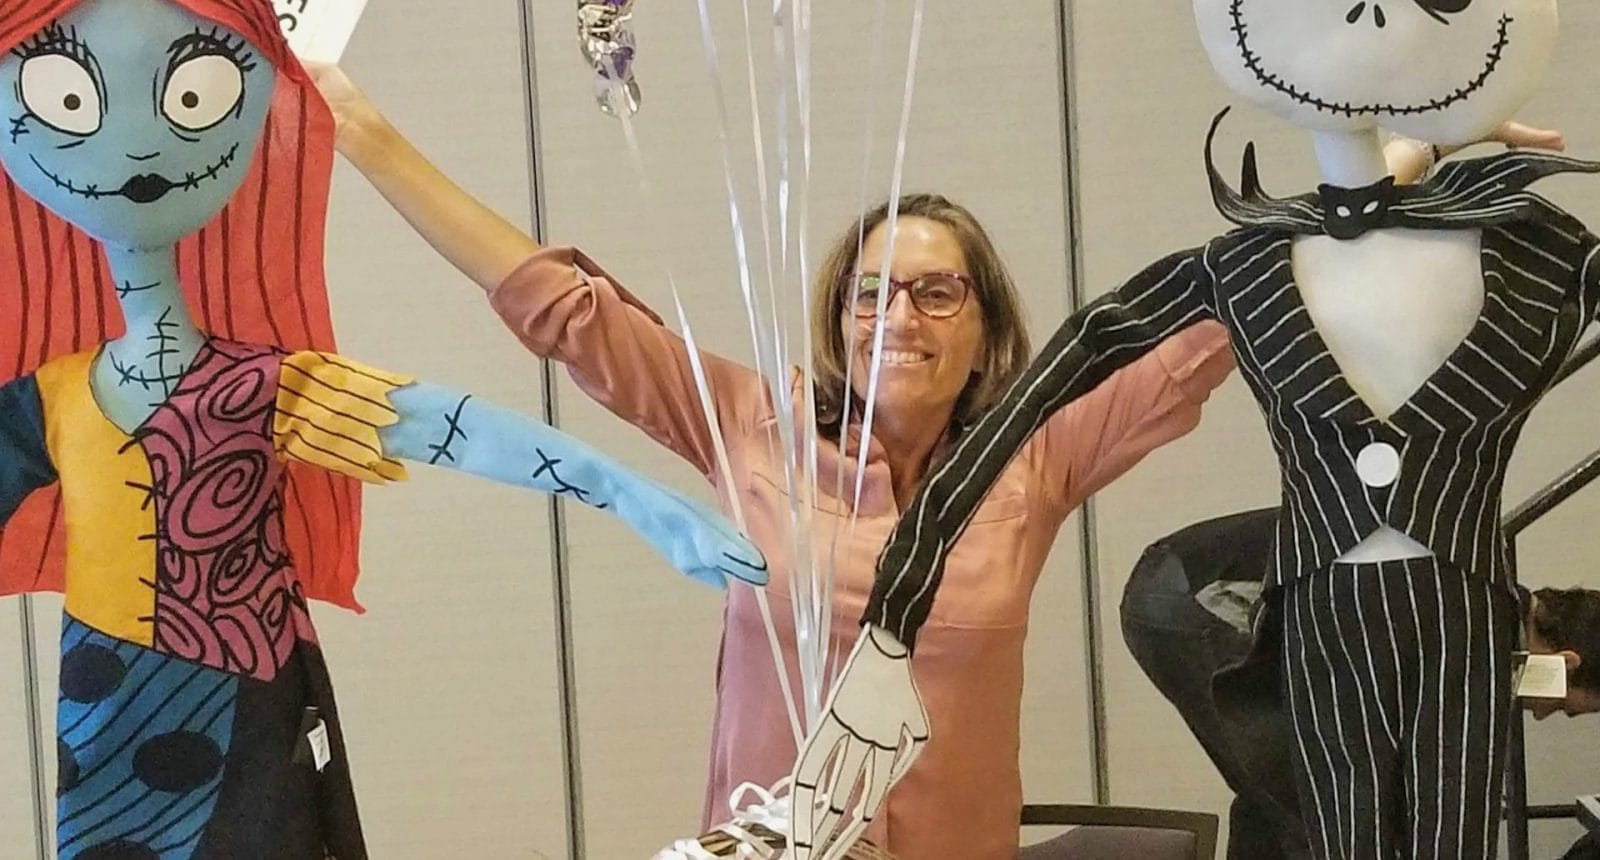 Female social worker with balloons and arms raised